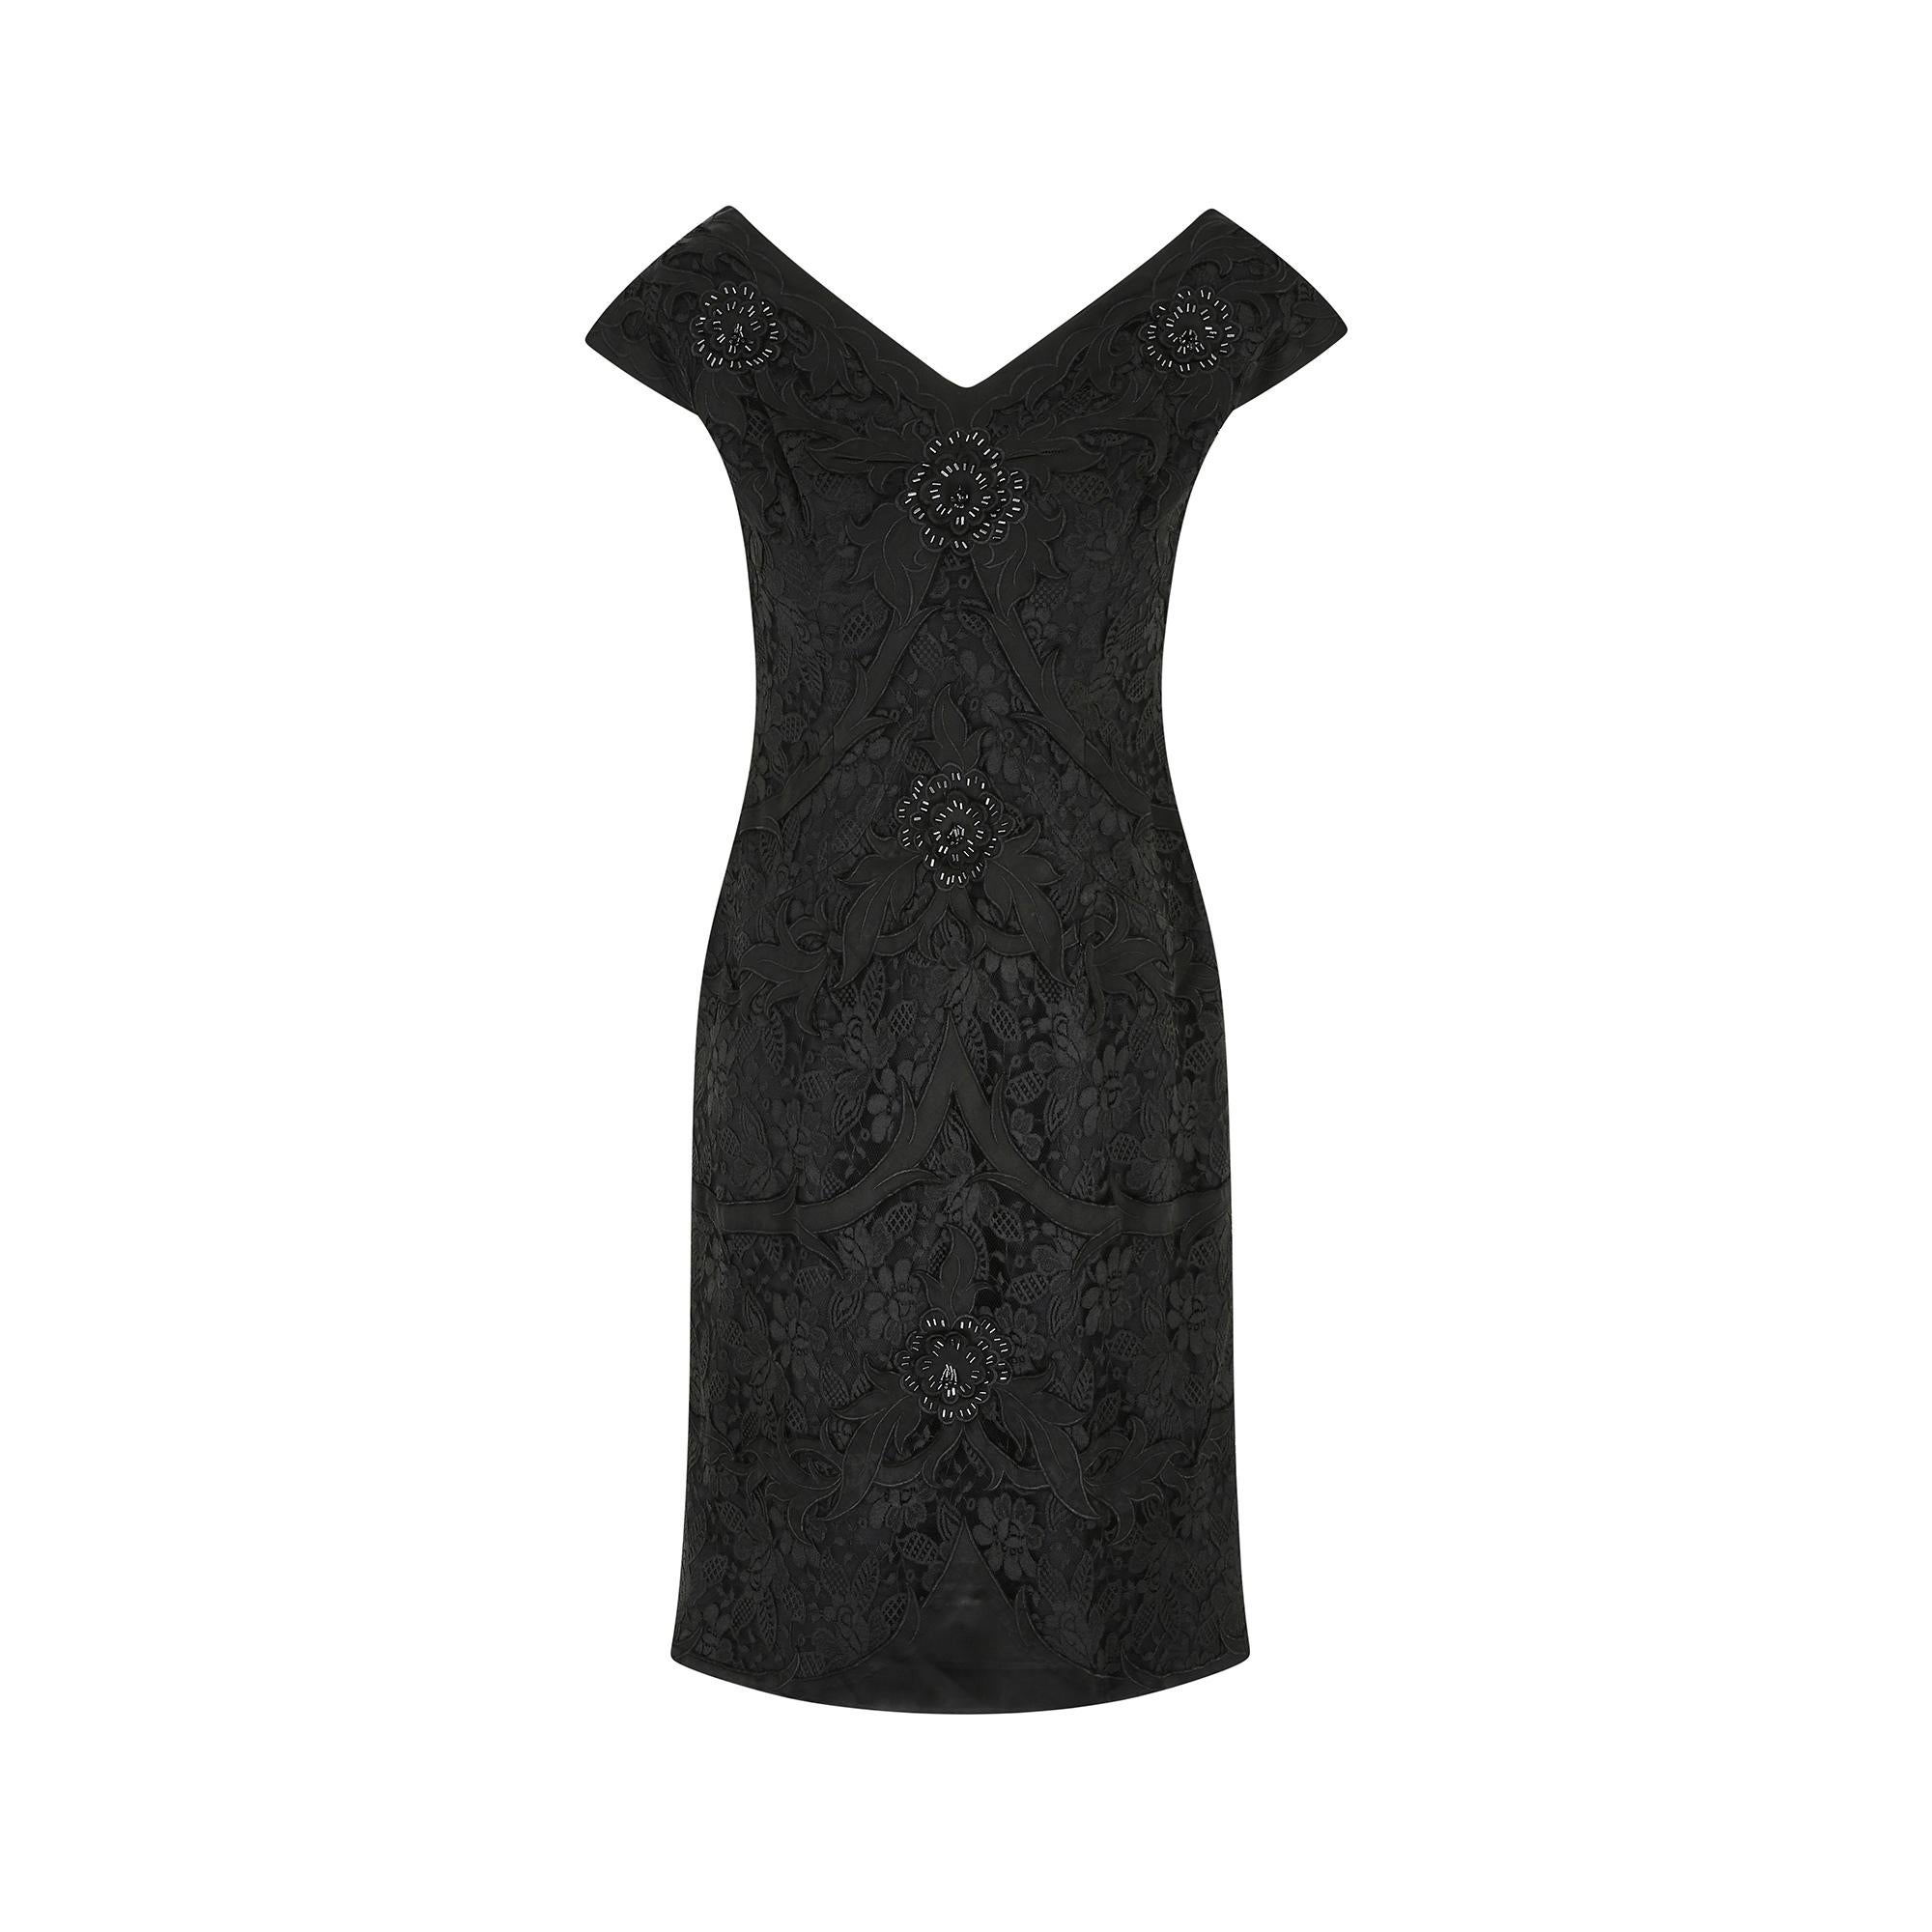 British high-end label Bramel designed this dress in the 1950s or very early 1960s. A graceful V-neckline and wide shoulders at the front and back is highly flattering.  Black lace sits under tonal satin appliquéd botanical forms and pretty beaded